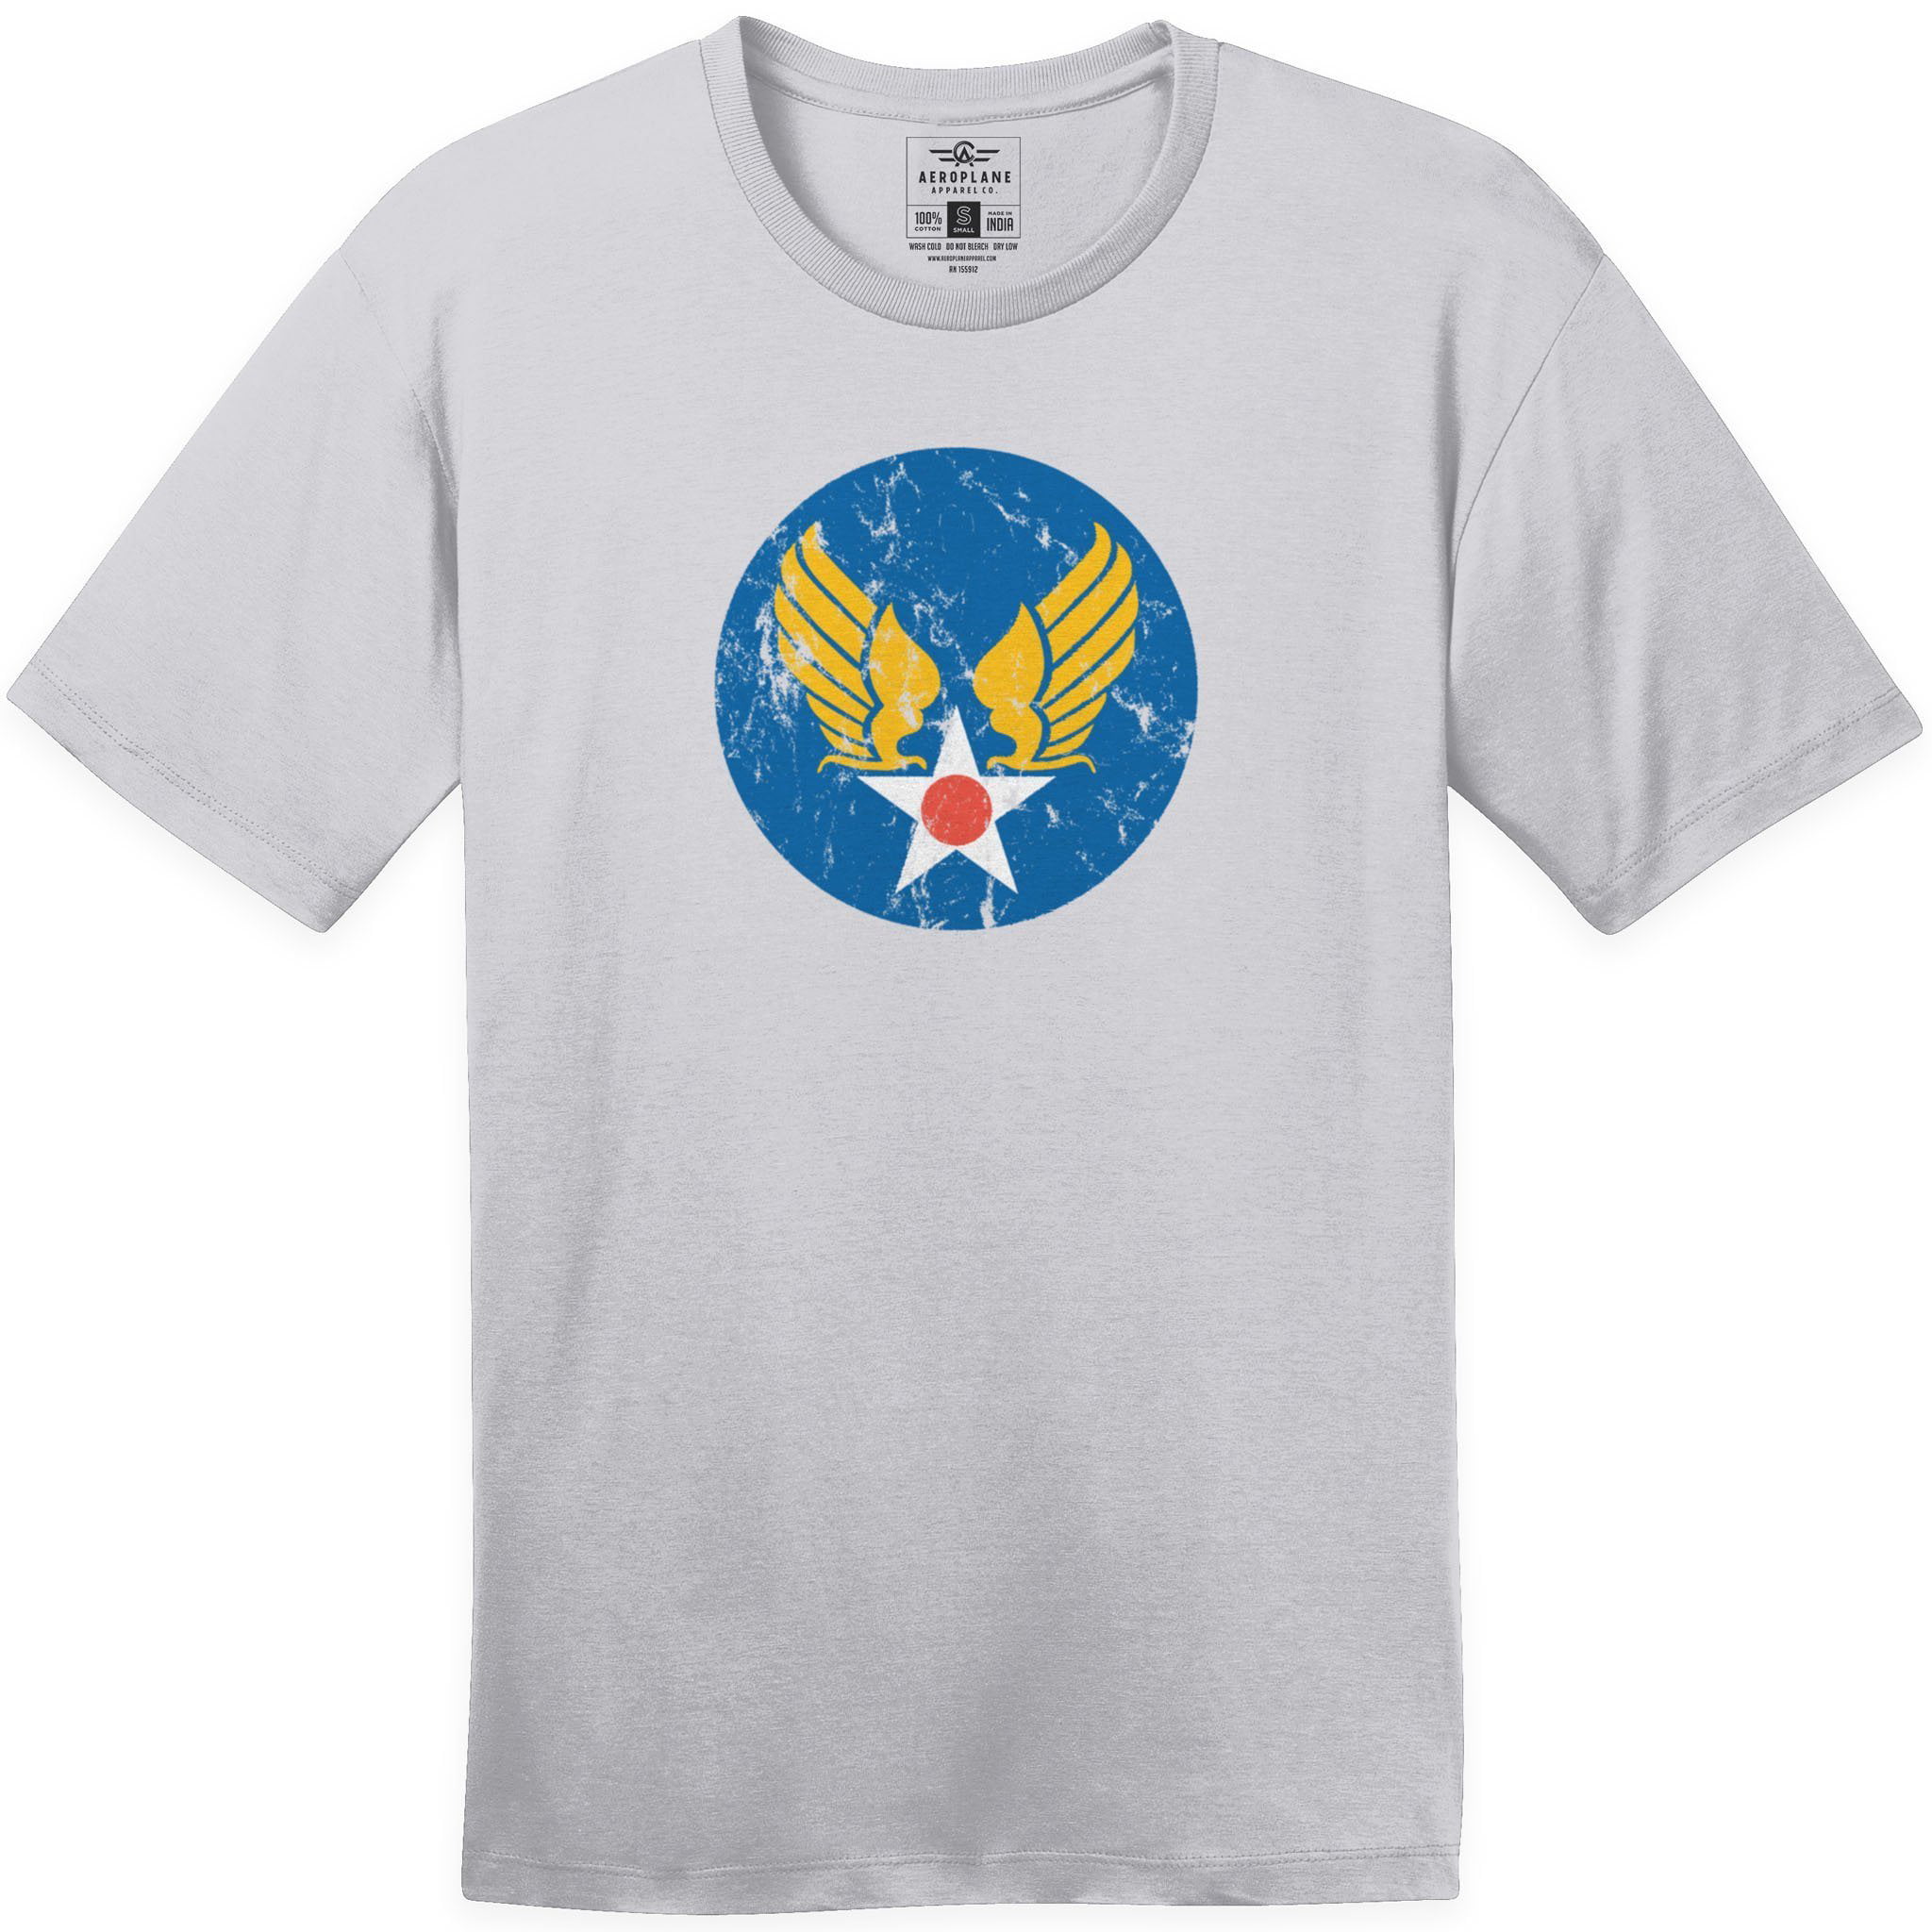 USAF Bro United States Air Force Wings Unisex Toddler Kids Youth T Shirt